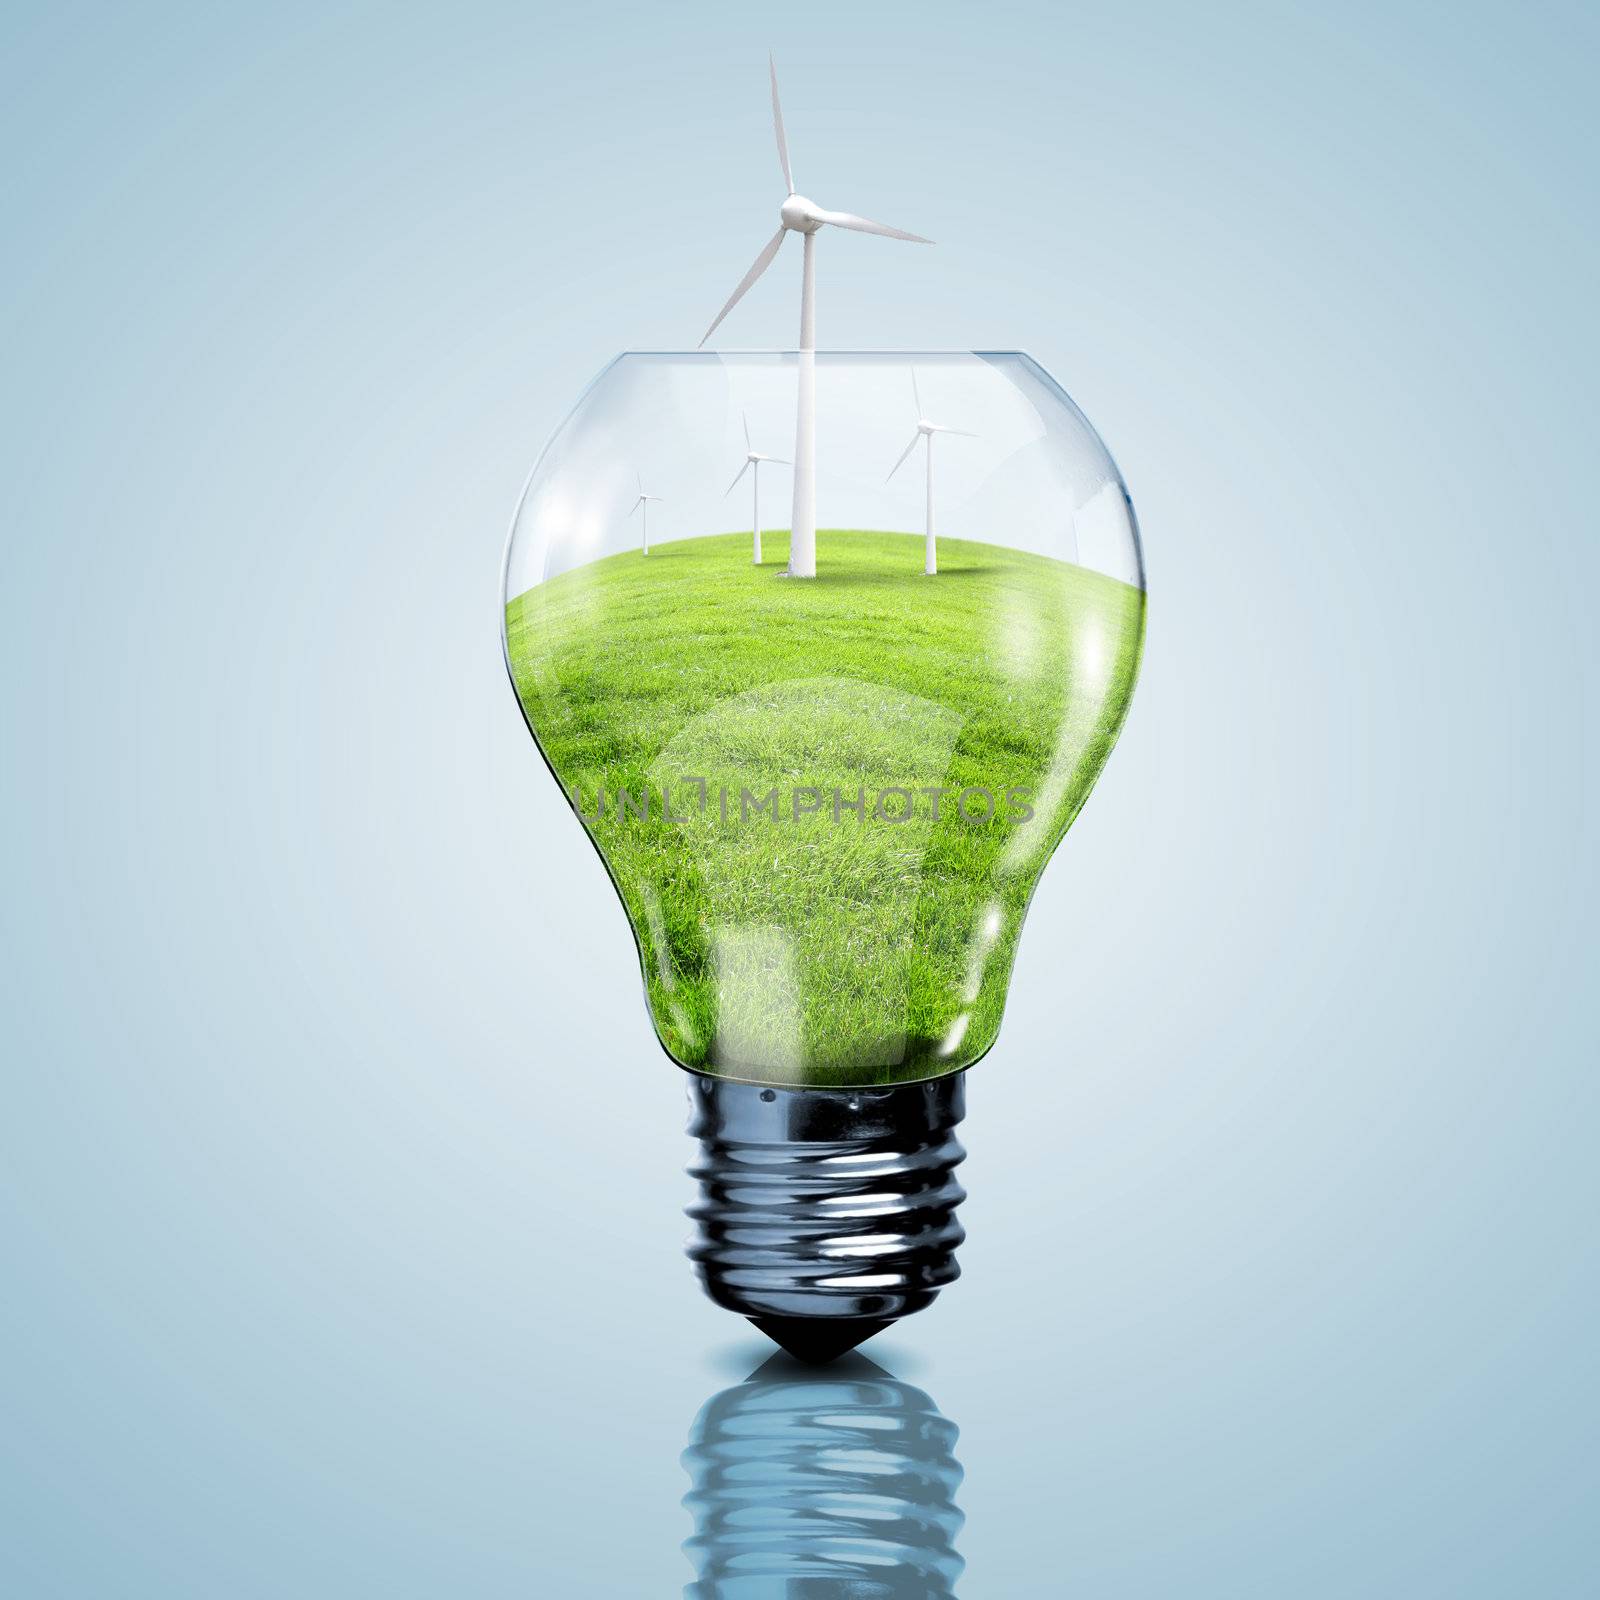 Electric light bulb and wind meels inside it as symbol of green energy